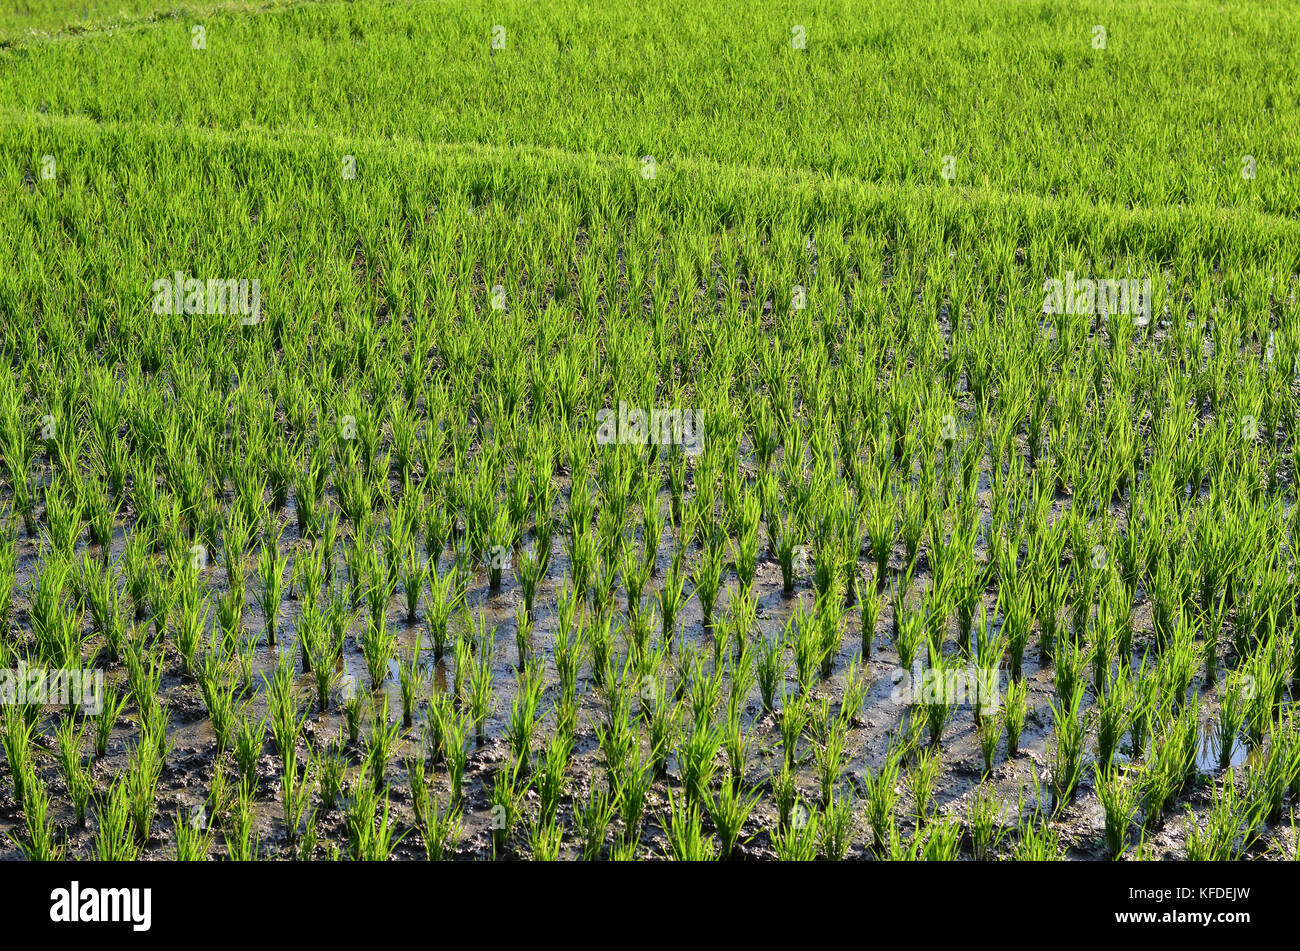 Small green rice plants growing in the shallow paddy fields, rice paddies with mud dividing walls, on the plain between small villages. Stock Photo